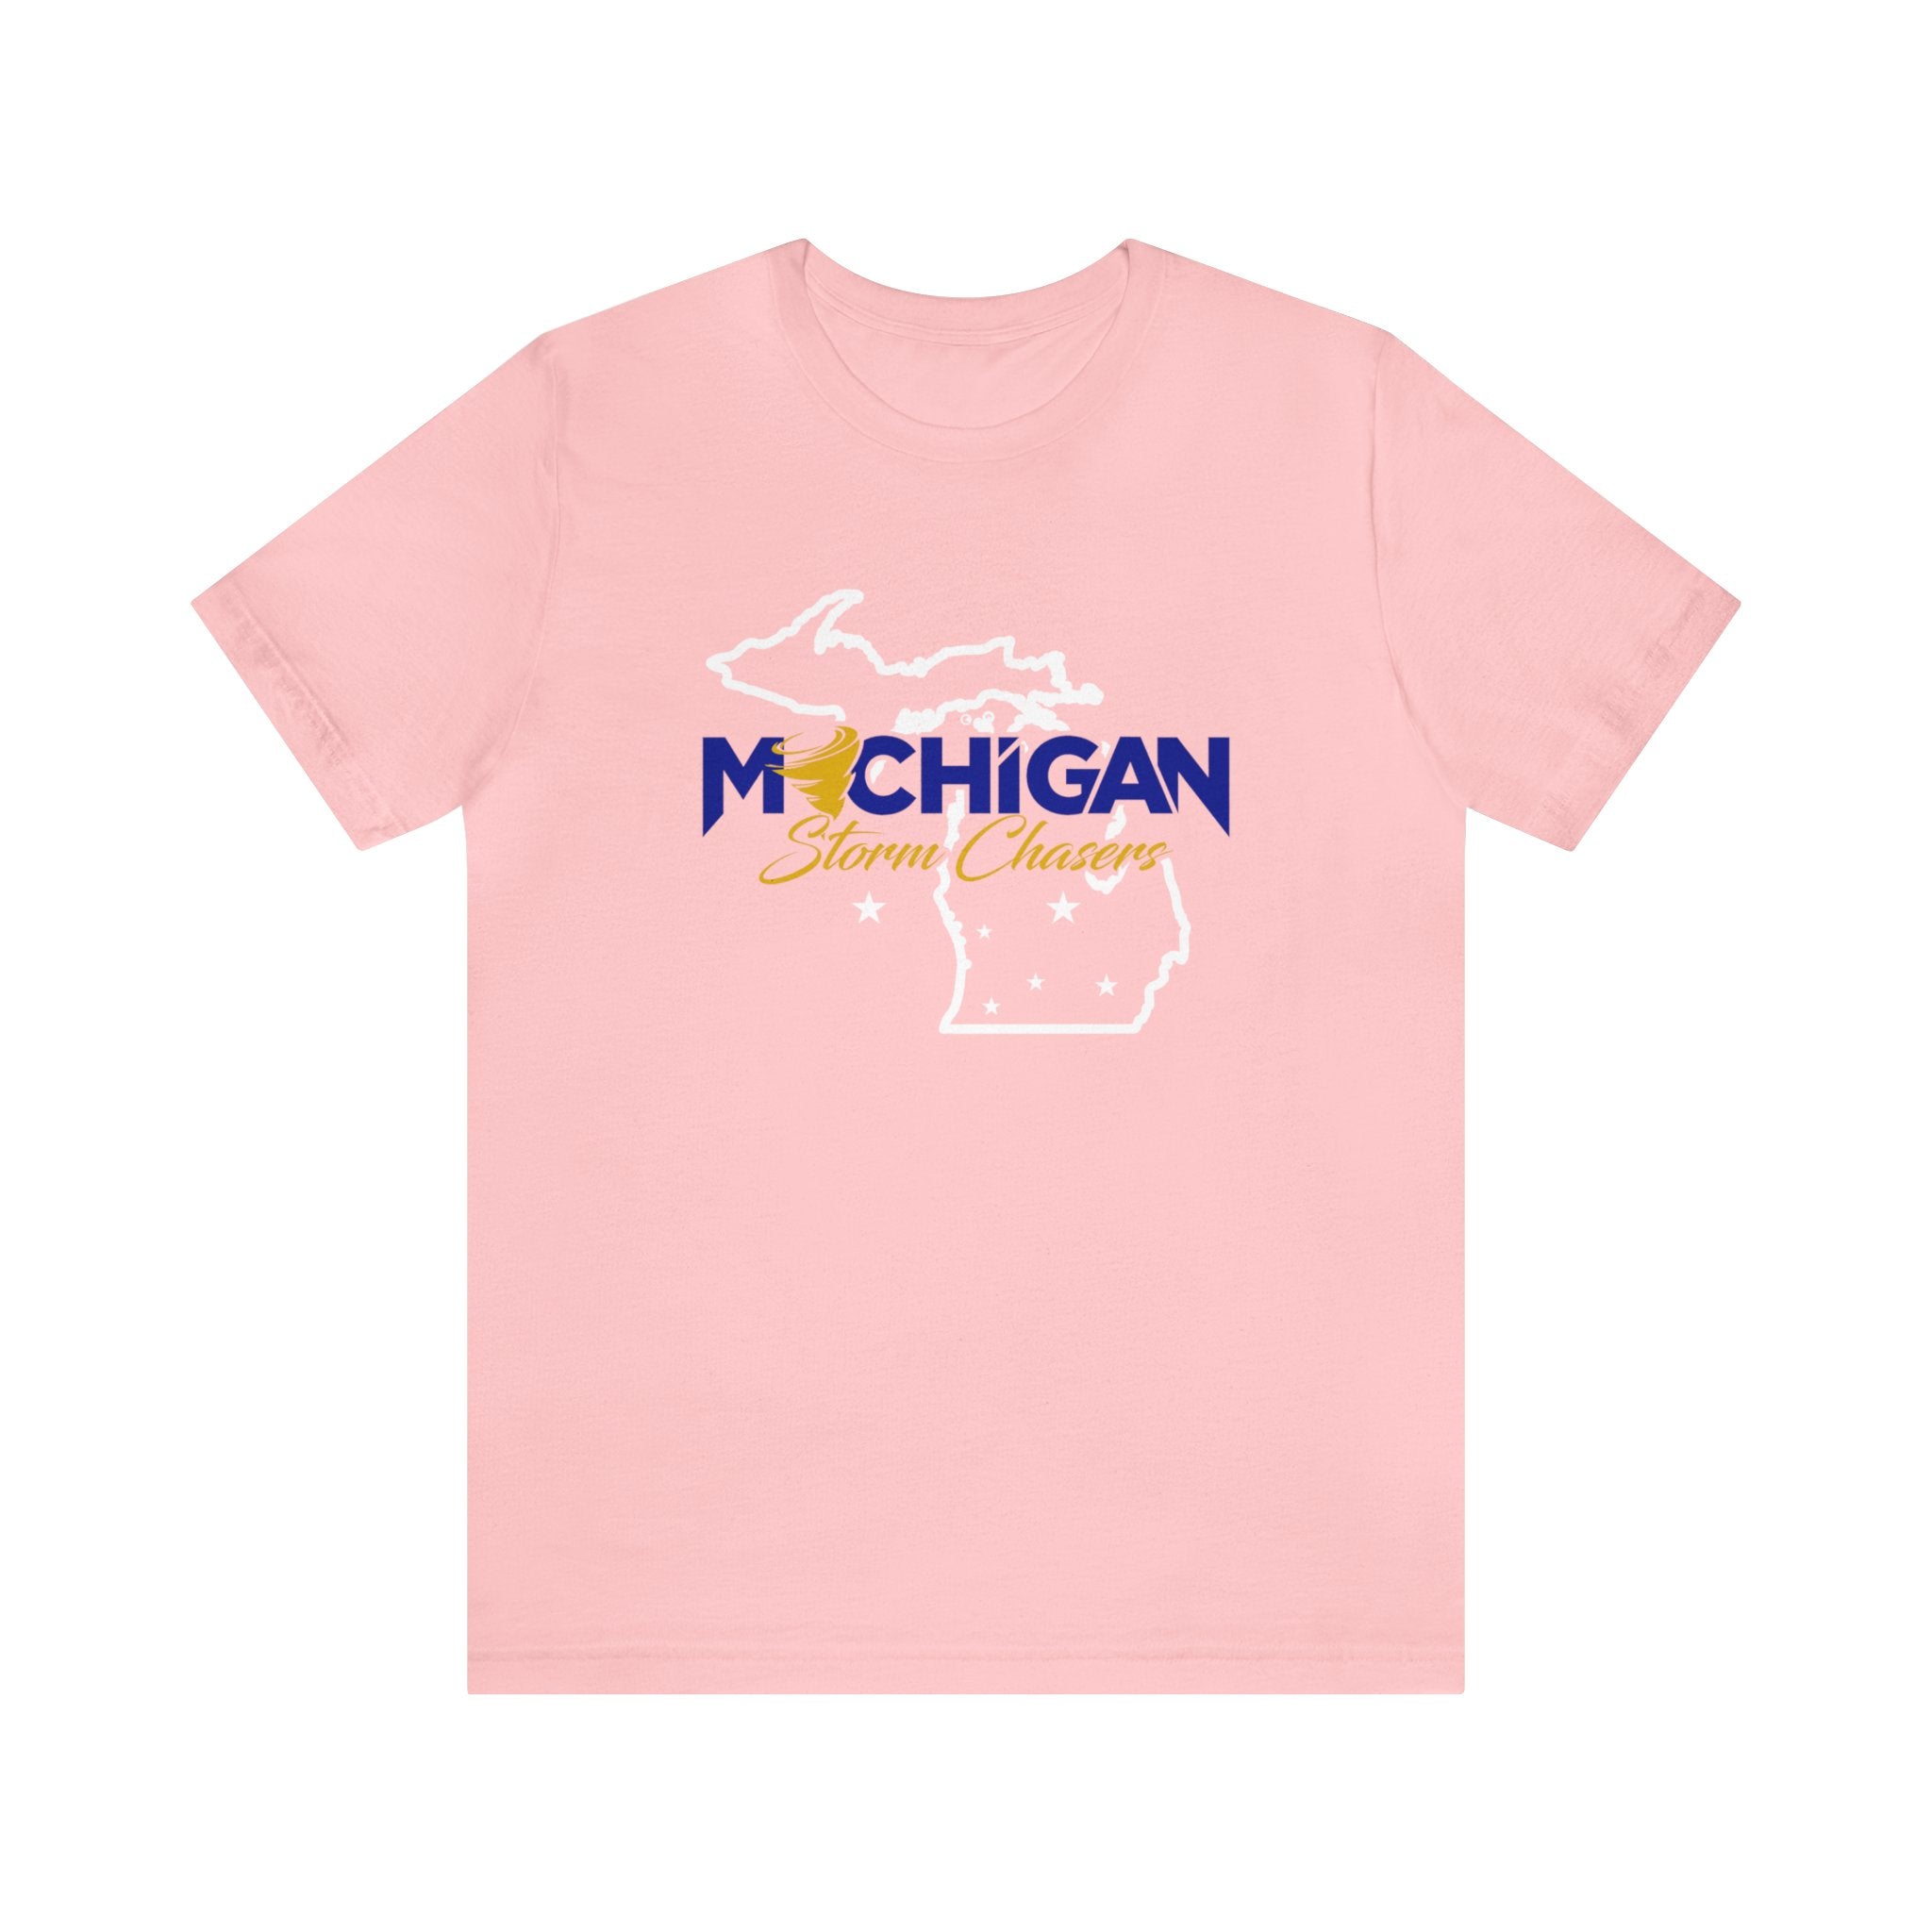 Michigan Storm Chasers Tee 